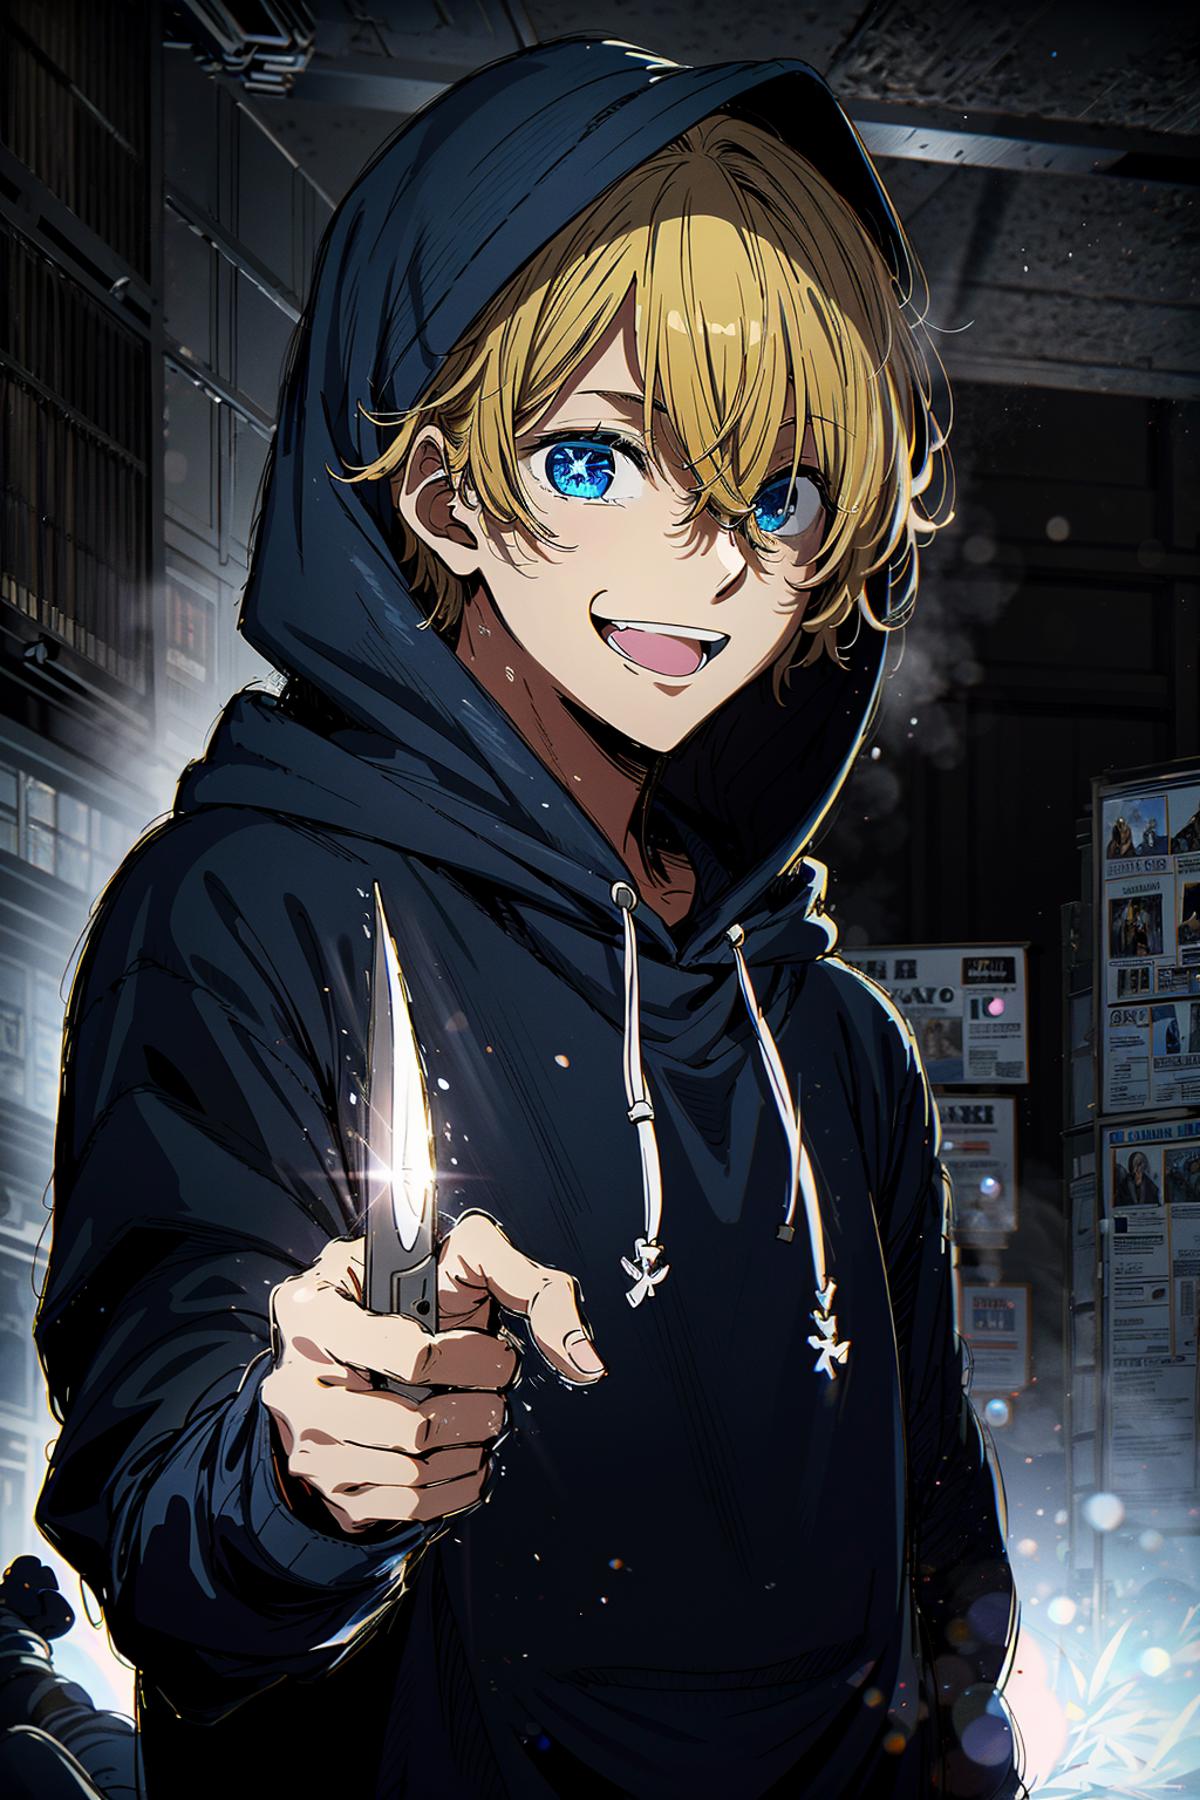 A boy wearing a hoodie and holding a knife.